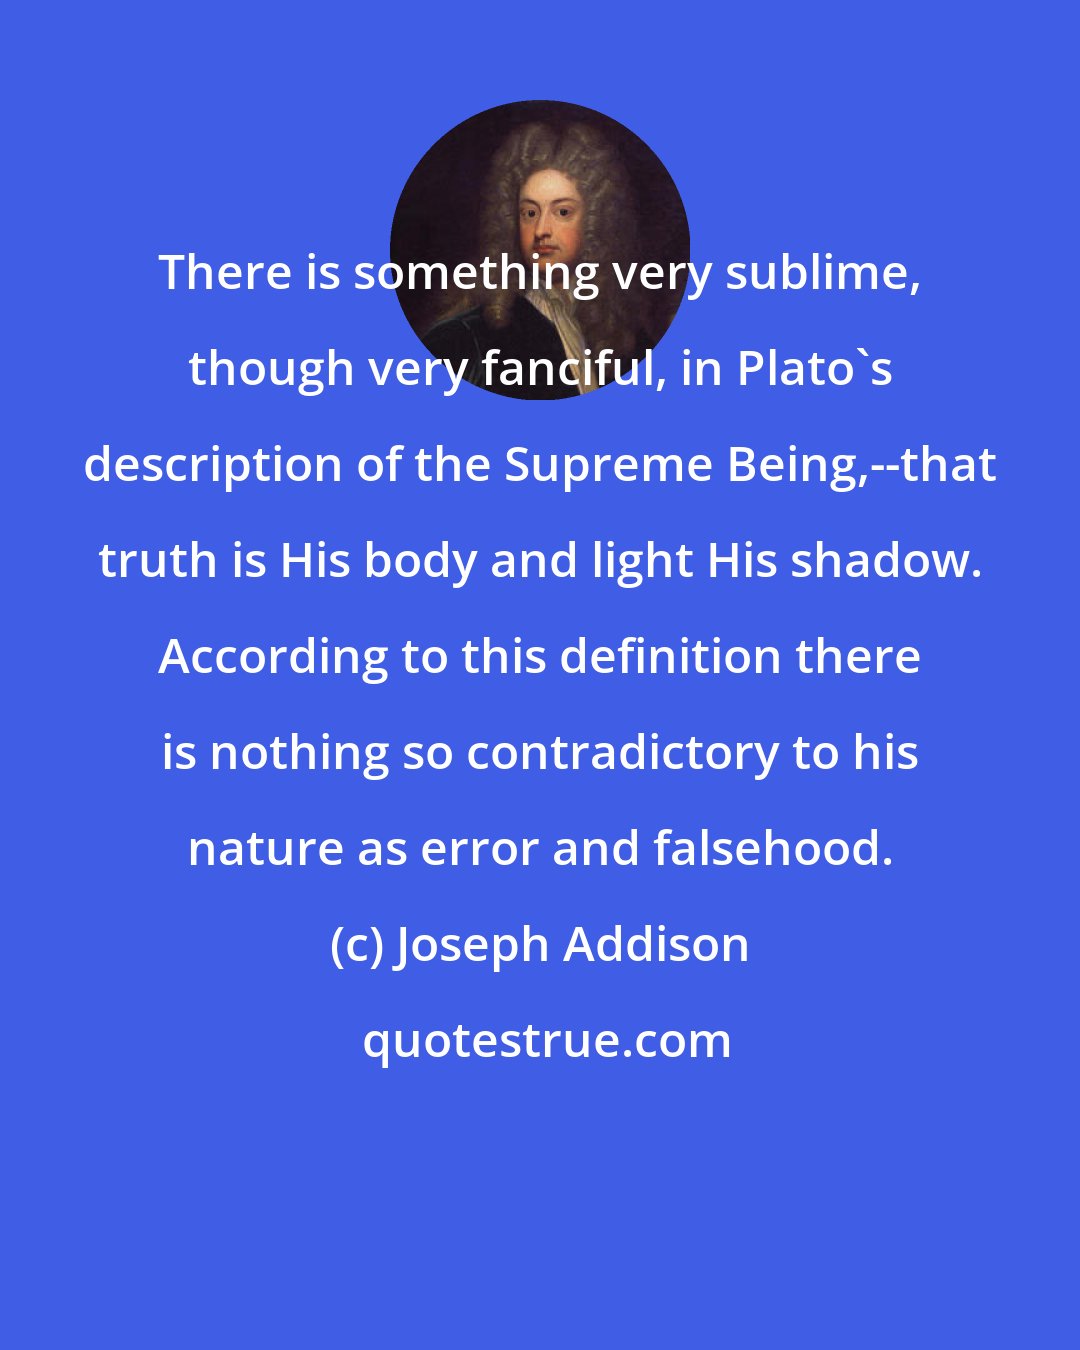 Joseph Addison: There is something very sublime, though very fanciful, in Plato's description of the Supreme Being,--that truth is His body and light His shadow. According to this definition there is nothing so contradictory to his nature as error and falsehood.